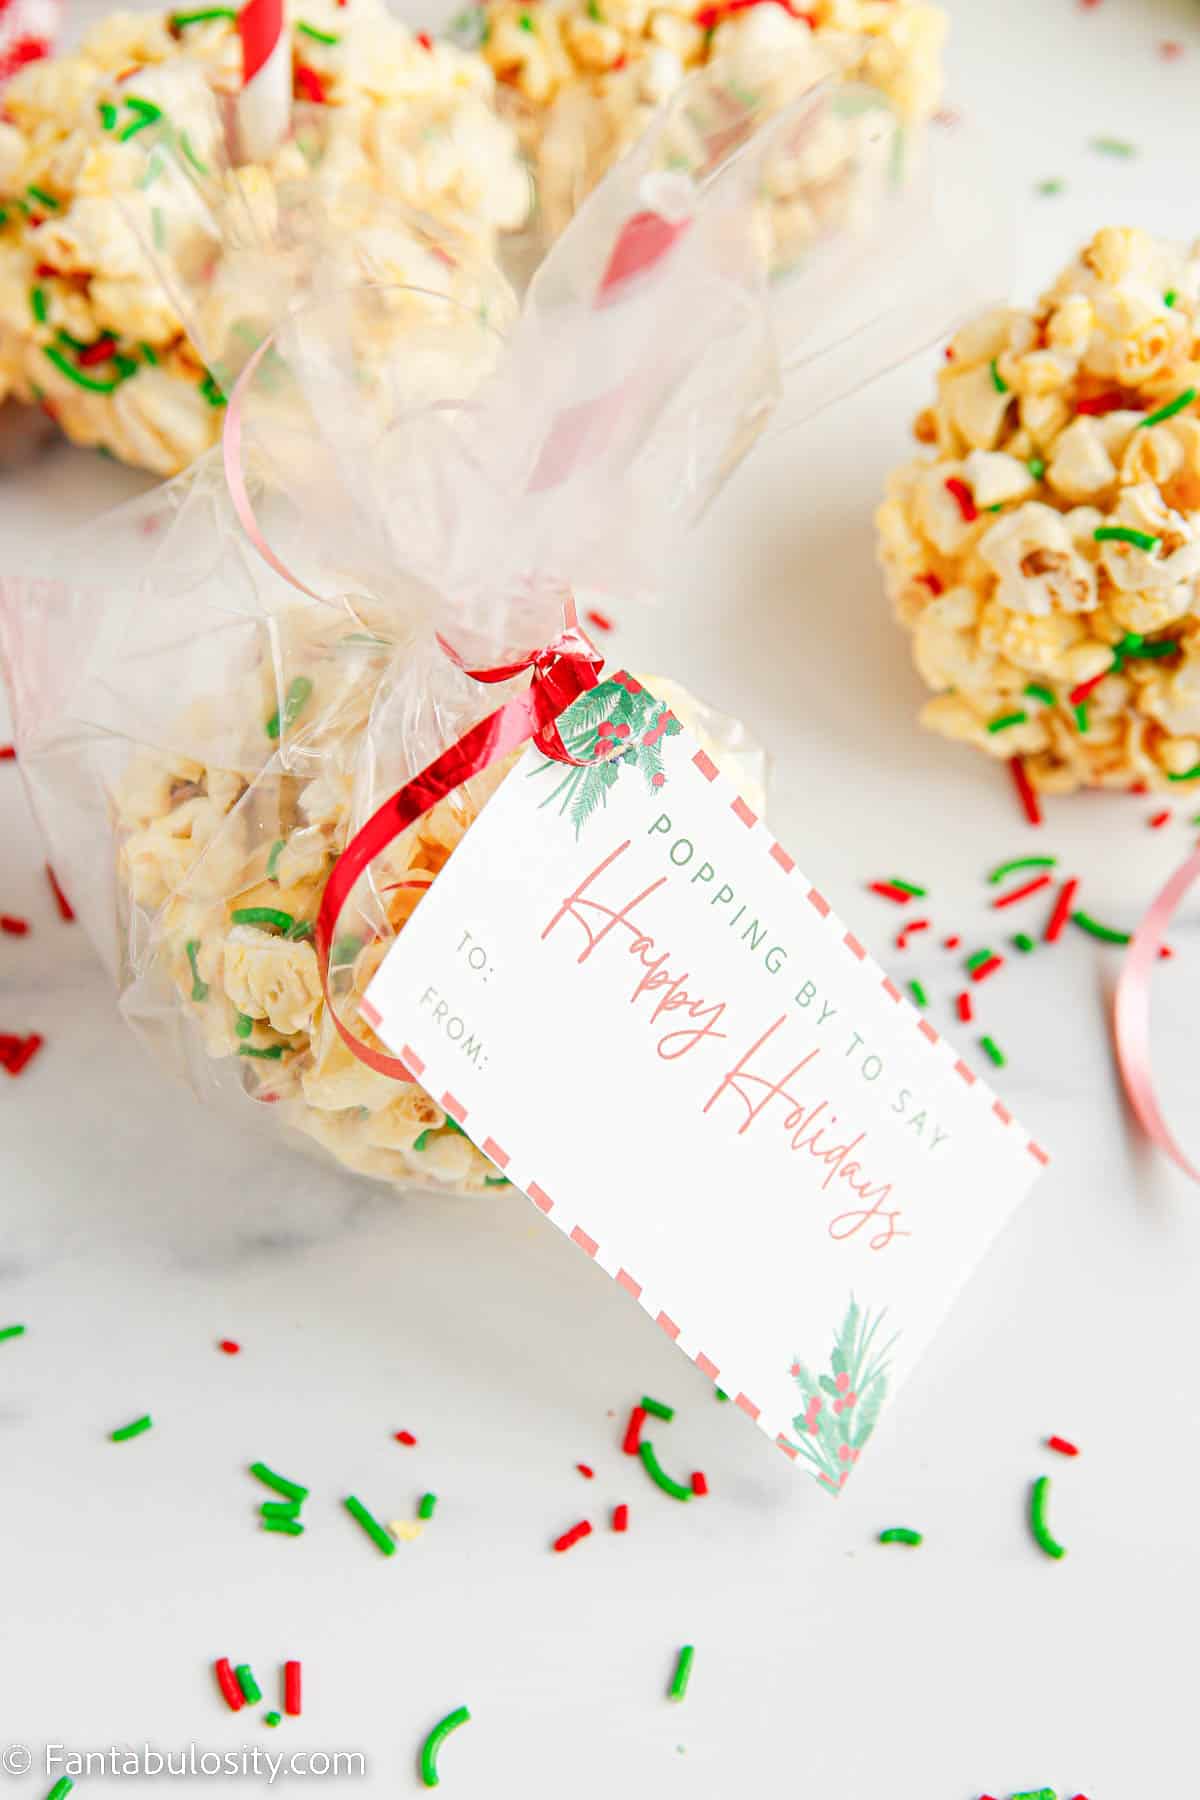 A marshmallow popcorn ball has been placed in a cellophane bag that is tied closed with a red ribbon and a festive holiday gift tag